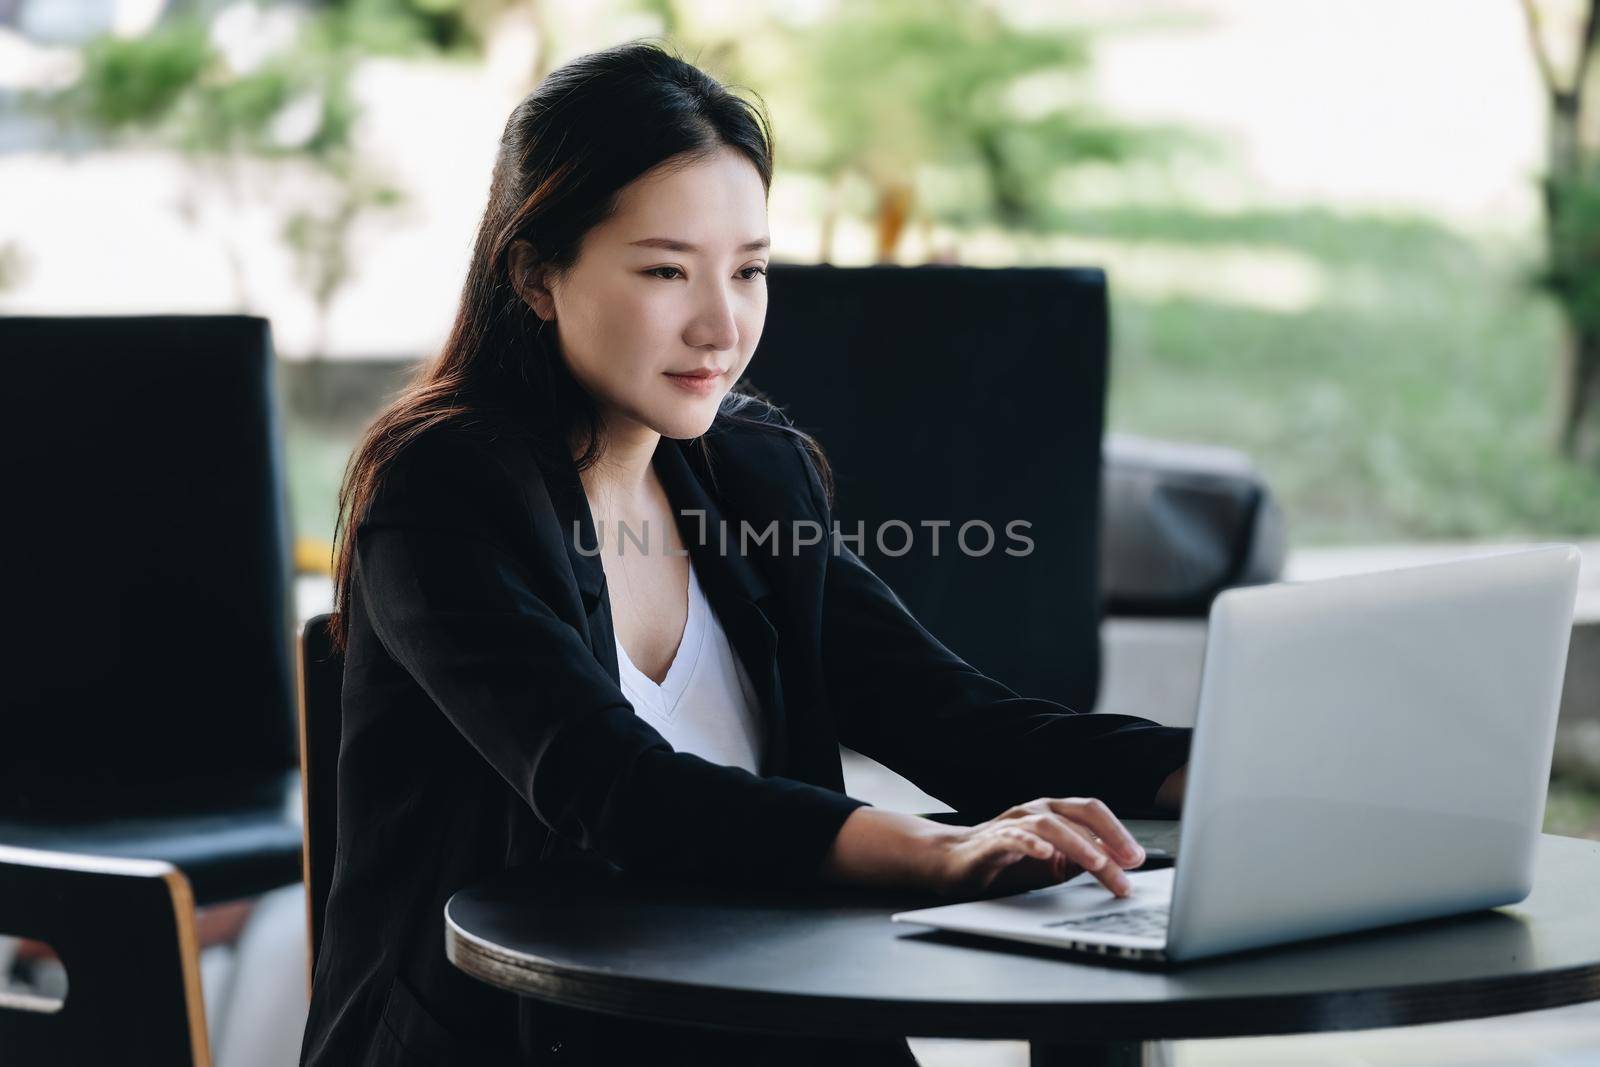 A female worker smiling happily while using a computer in the office